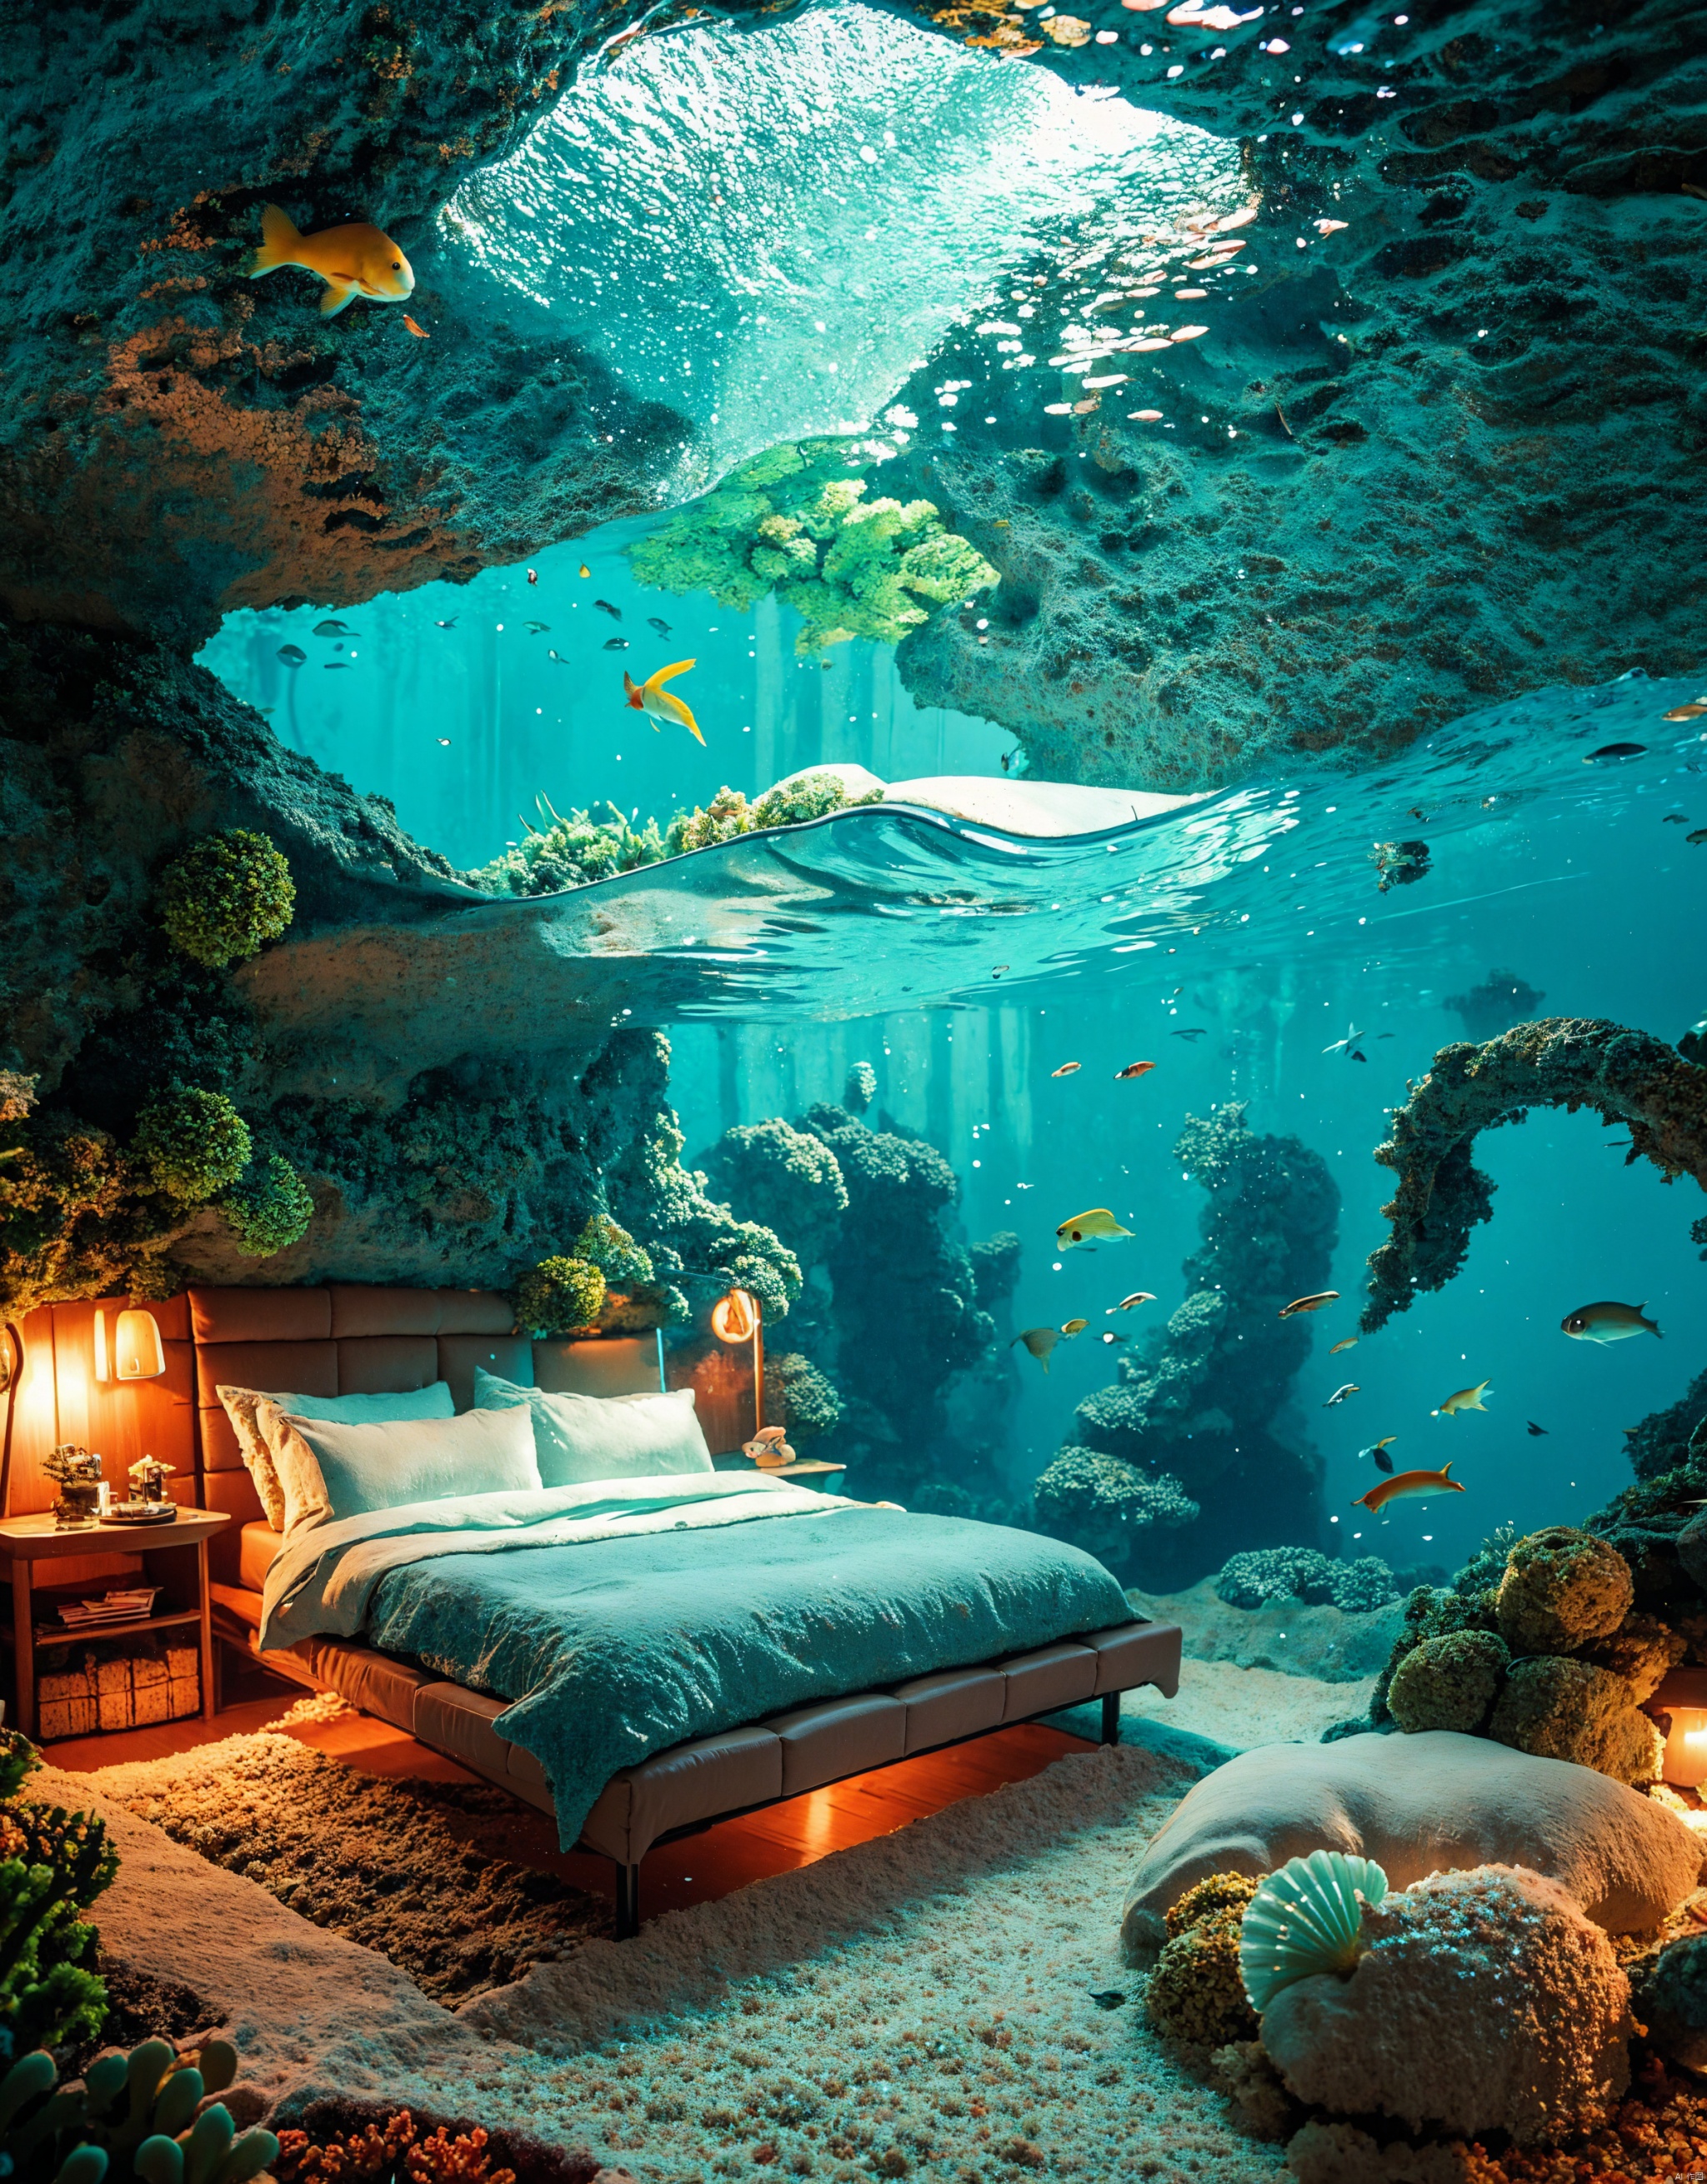  The seafloor, Sofa, living room, walls and ceiling are made of transparent bubbles, and colorful corals and swimming fish can be clearly seen outside. Indoor shell decoration sofa, and decorated with shells and starfish and other marine elements. The room is illuminated by soft blue light, creating a mysterious and serene atmosphere, high quality all over Takashimizu lower bedroom with marine elements, vivid coral reefs and a variety of marine life, intricate details, and a lovely view of the ocean, clear focus, realism, 3D illustrations by Greg Rutkowski, trends in ArtStation, CGSociety, conceptual art for fantasy underwater homes, serene surroundings, detailed ocean decor, atmospheric lighting, best viewed in widescreen format.